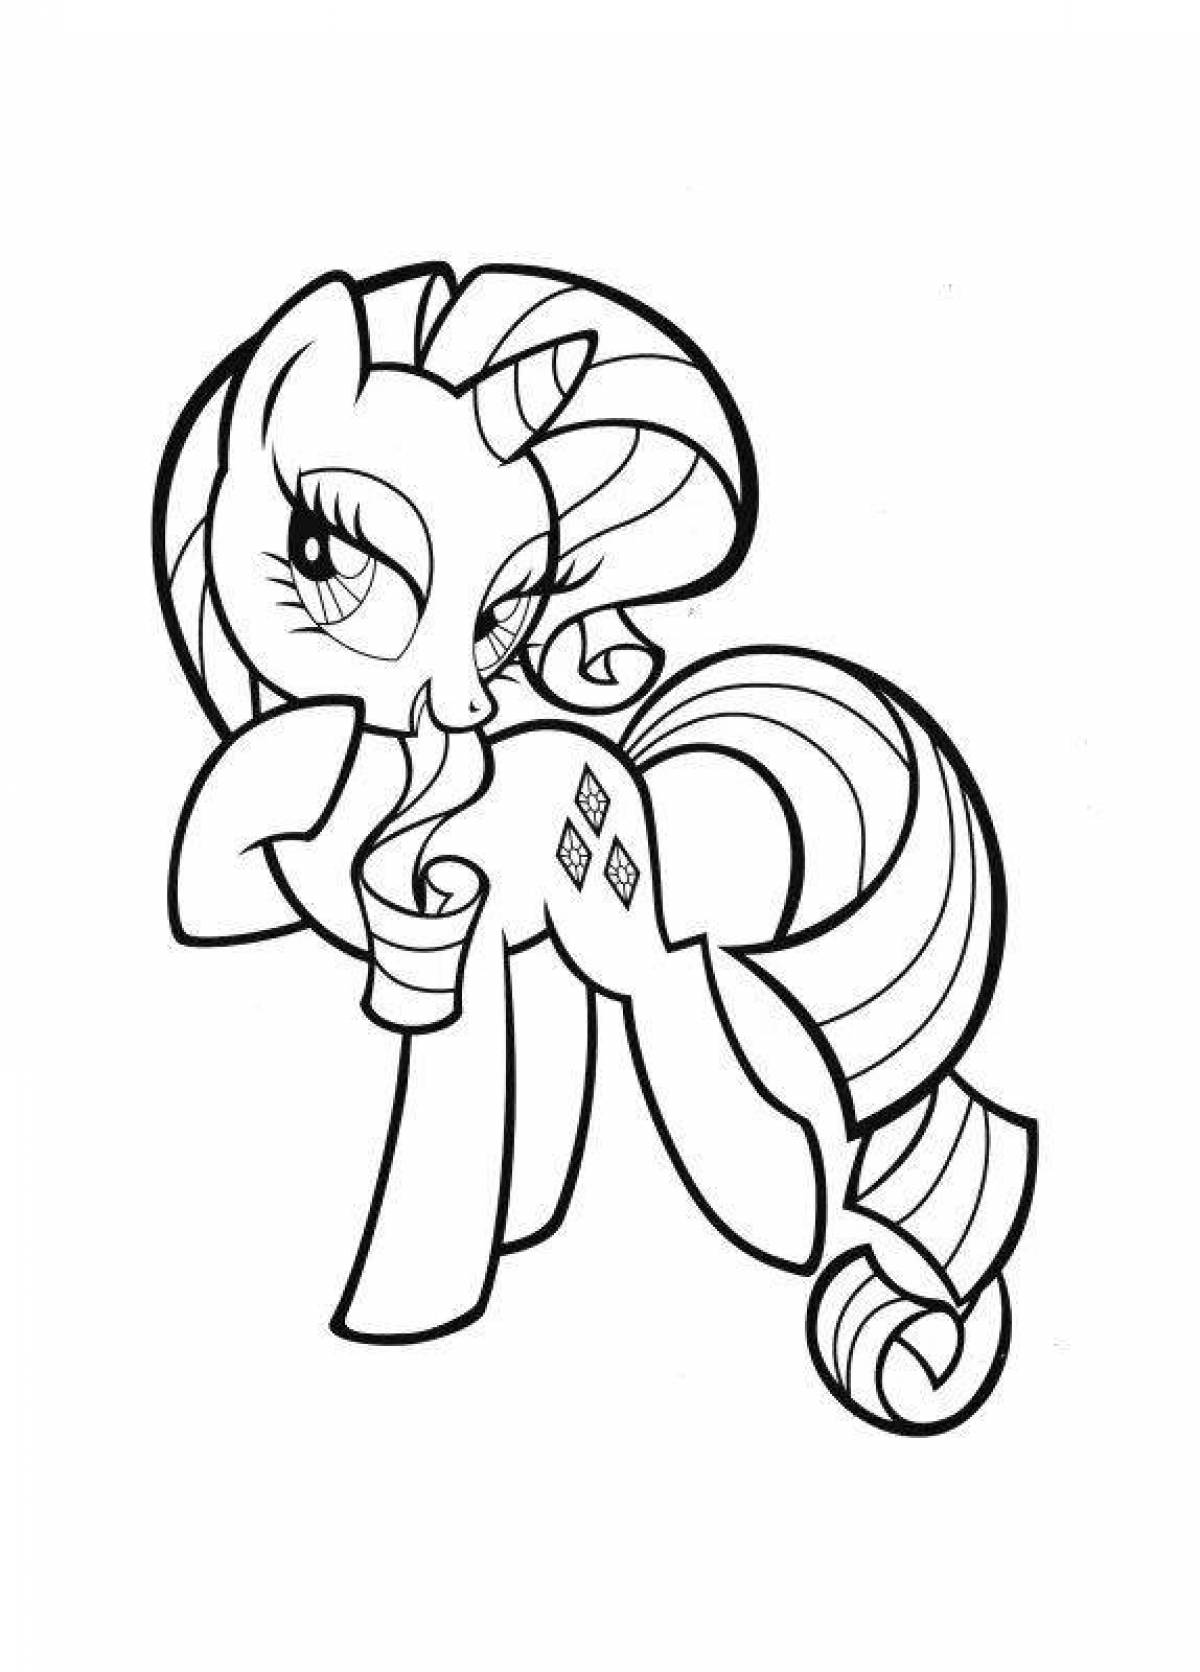 Rarity pony glowing coloring book